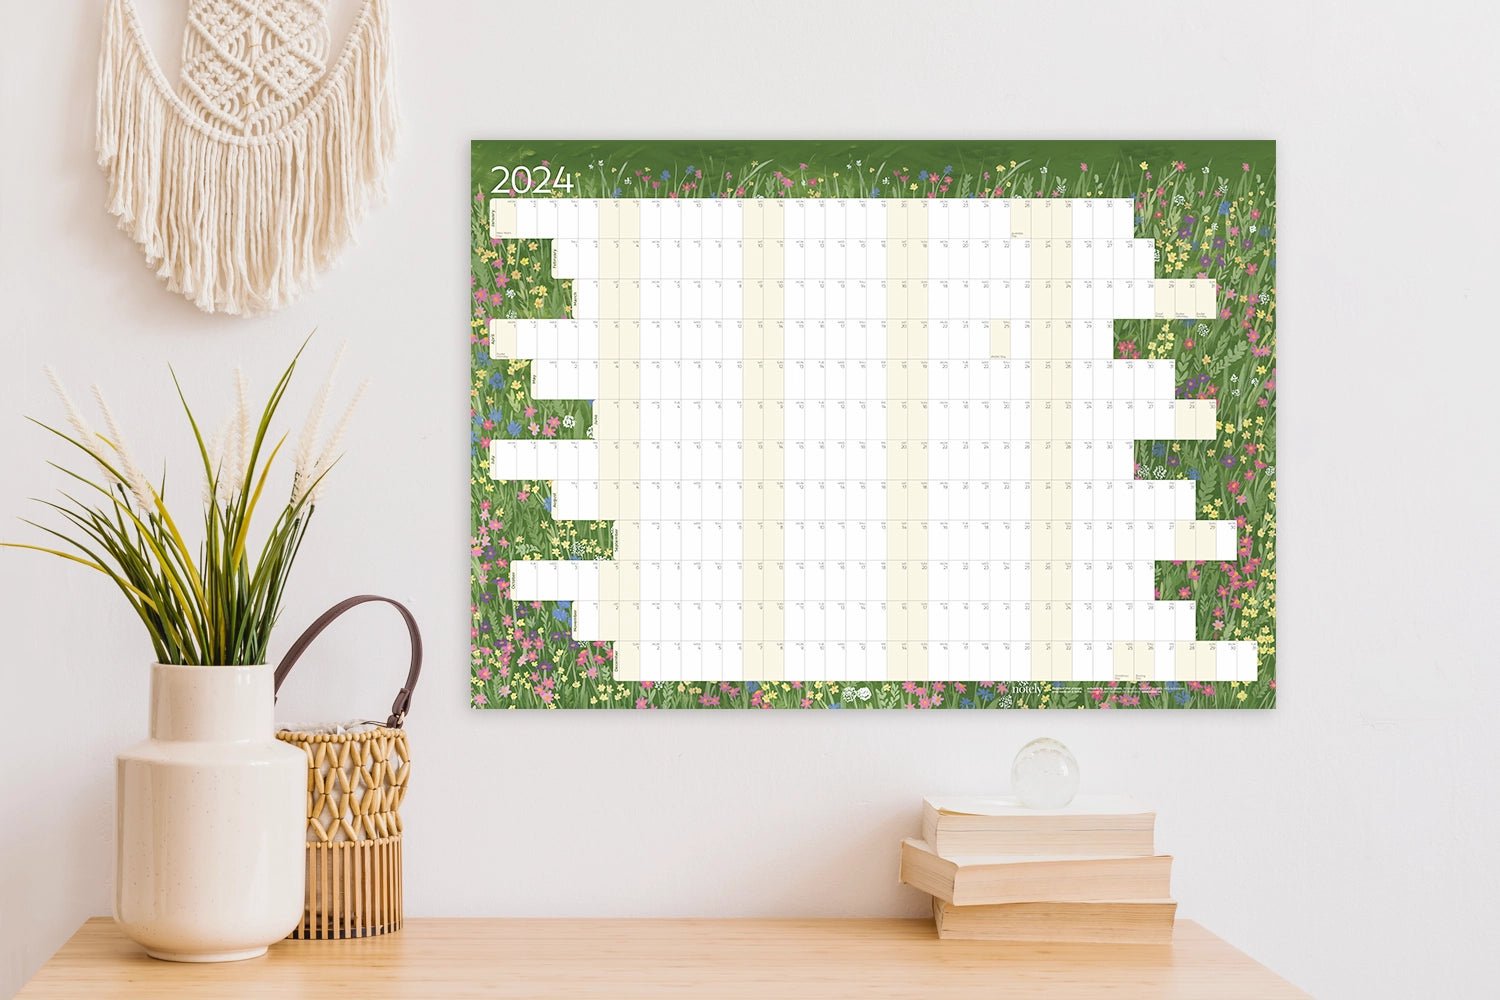 Digital detox: The benefits of sustainable paper-based wall planners - Notely